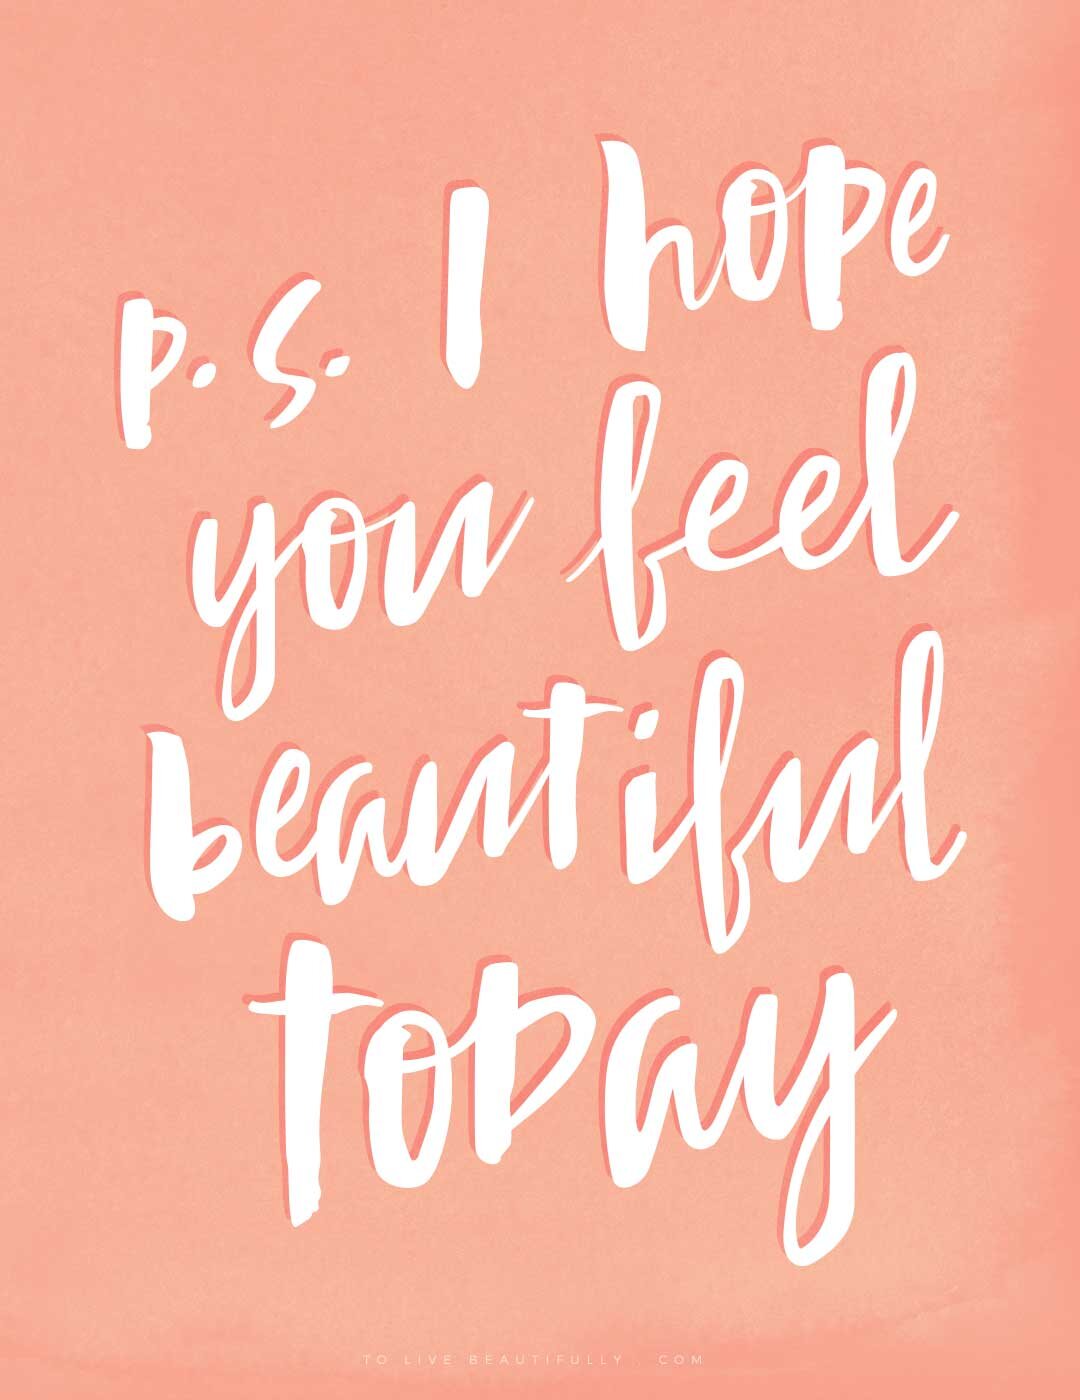 p.s. I hope you feel beautiful today